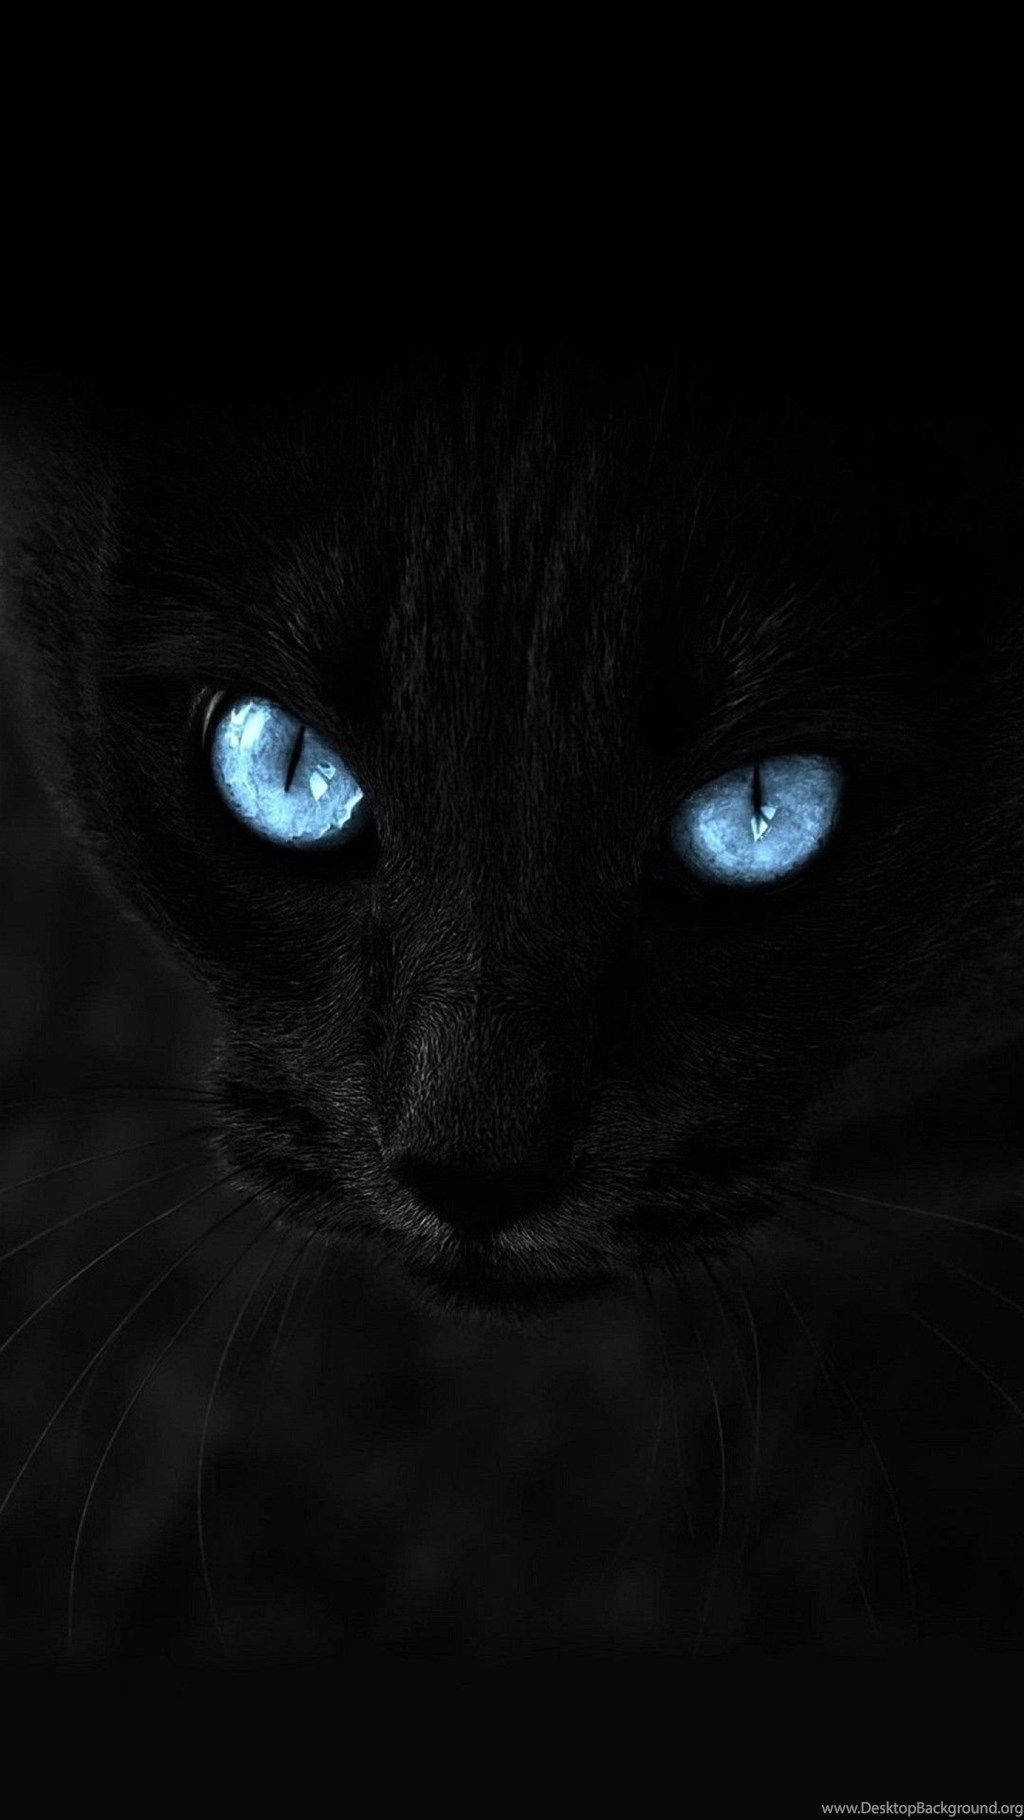 A Majestic Dark Cat With Blue Eyes For Your Iphone. Background